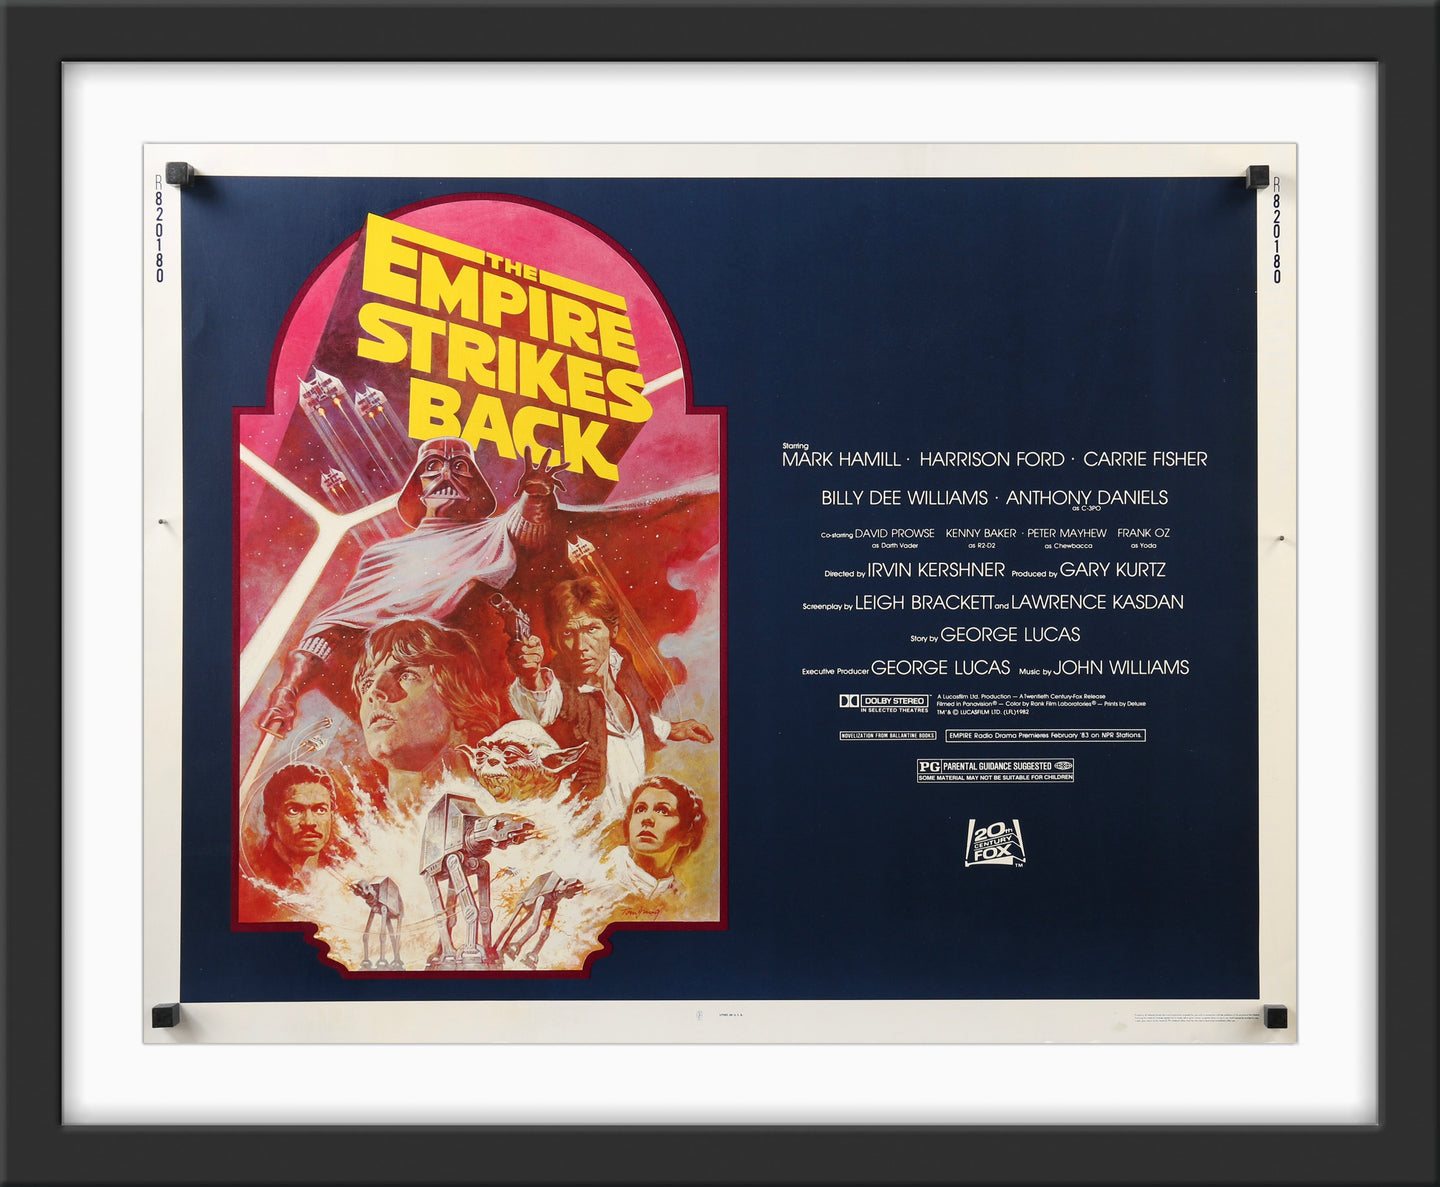 An original half sheet movie poster for the Star Wars film The Empire Strikes Back